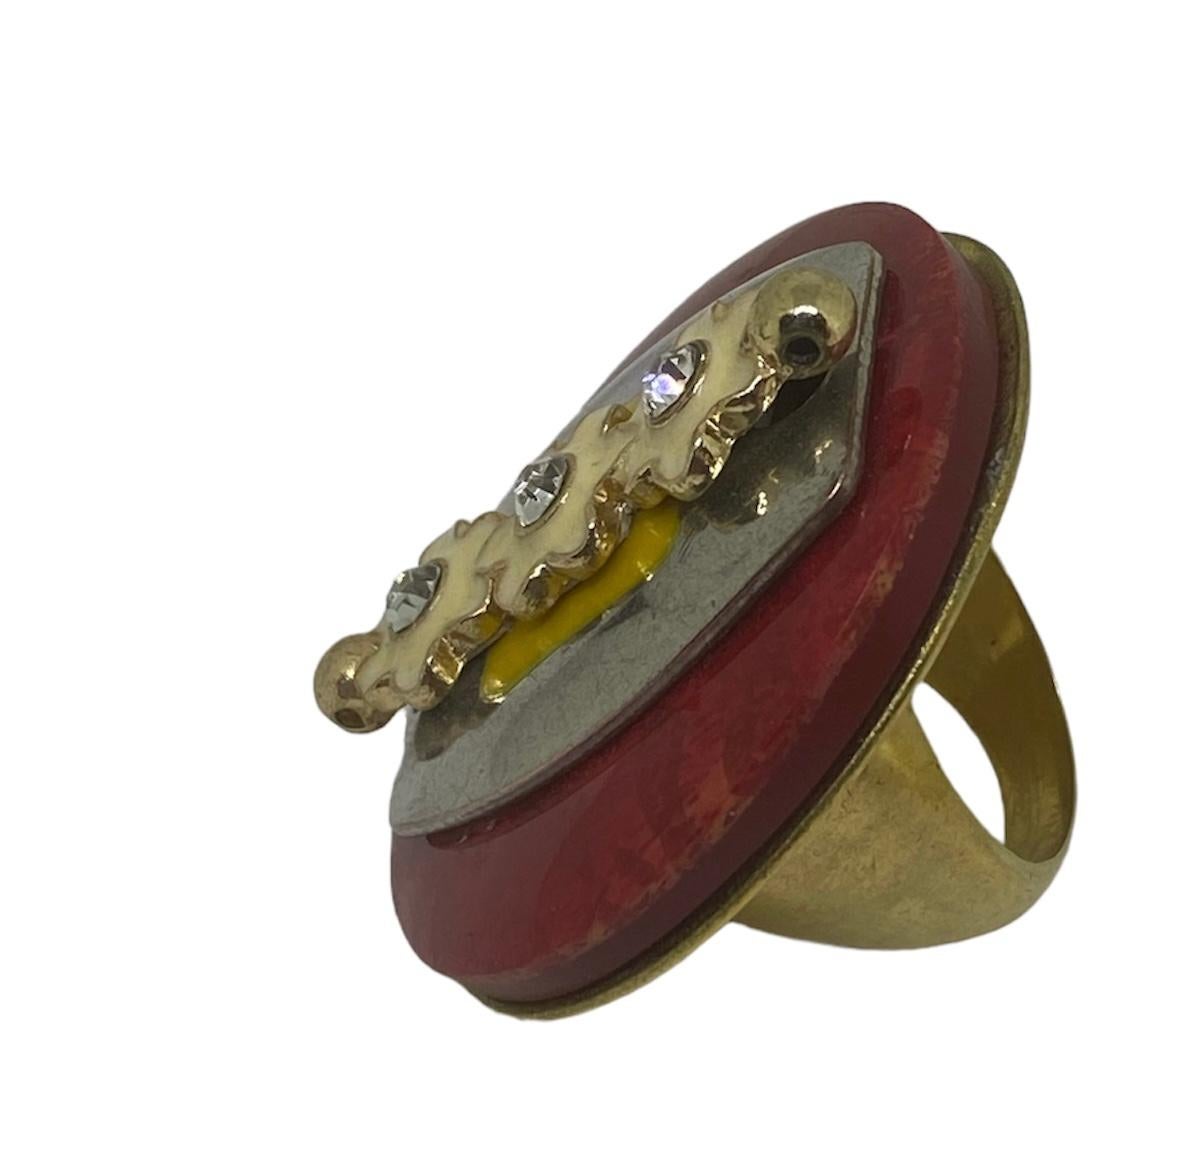 Baguette Cut One Off Ring. High Upcycling. Quartz, Gold Plated Bronze & Vintage Elements. For Sale